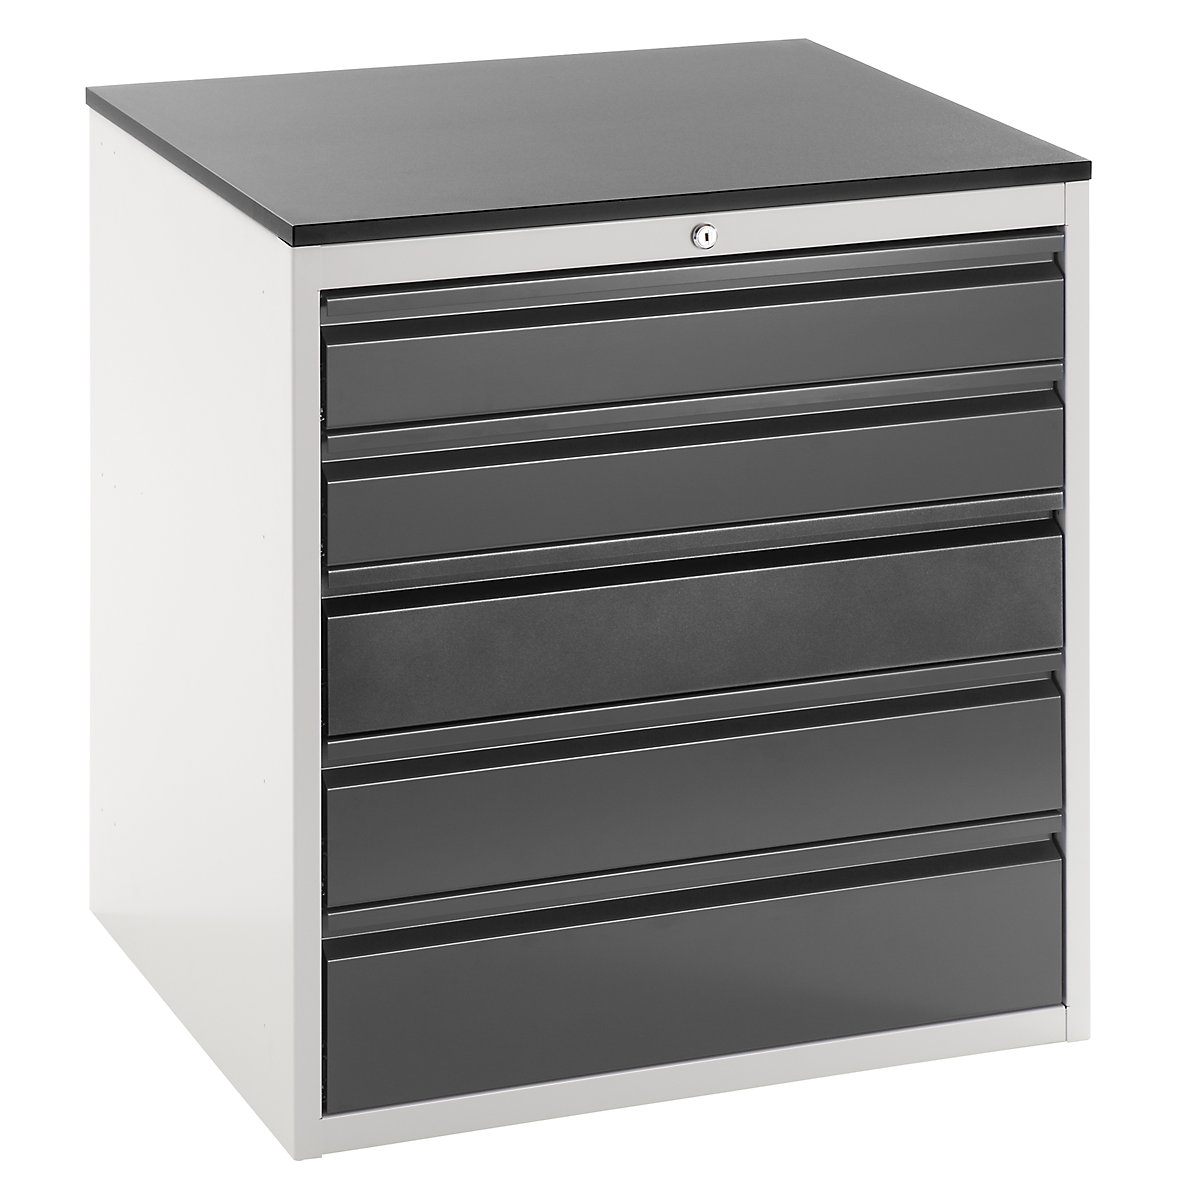 Drawer cupboard with telescopic guides – RAU, height 820 mm, drawers: 2 x 120, 2 x 150, 1 x 180 mm, light grey / charcoal, width 770 mm-12